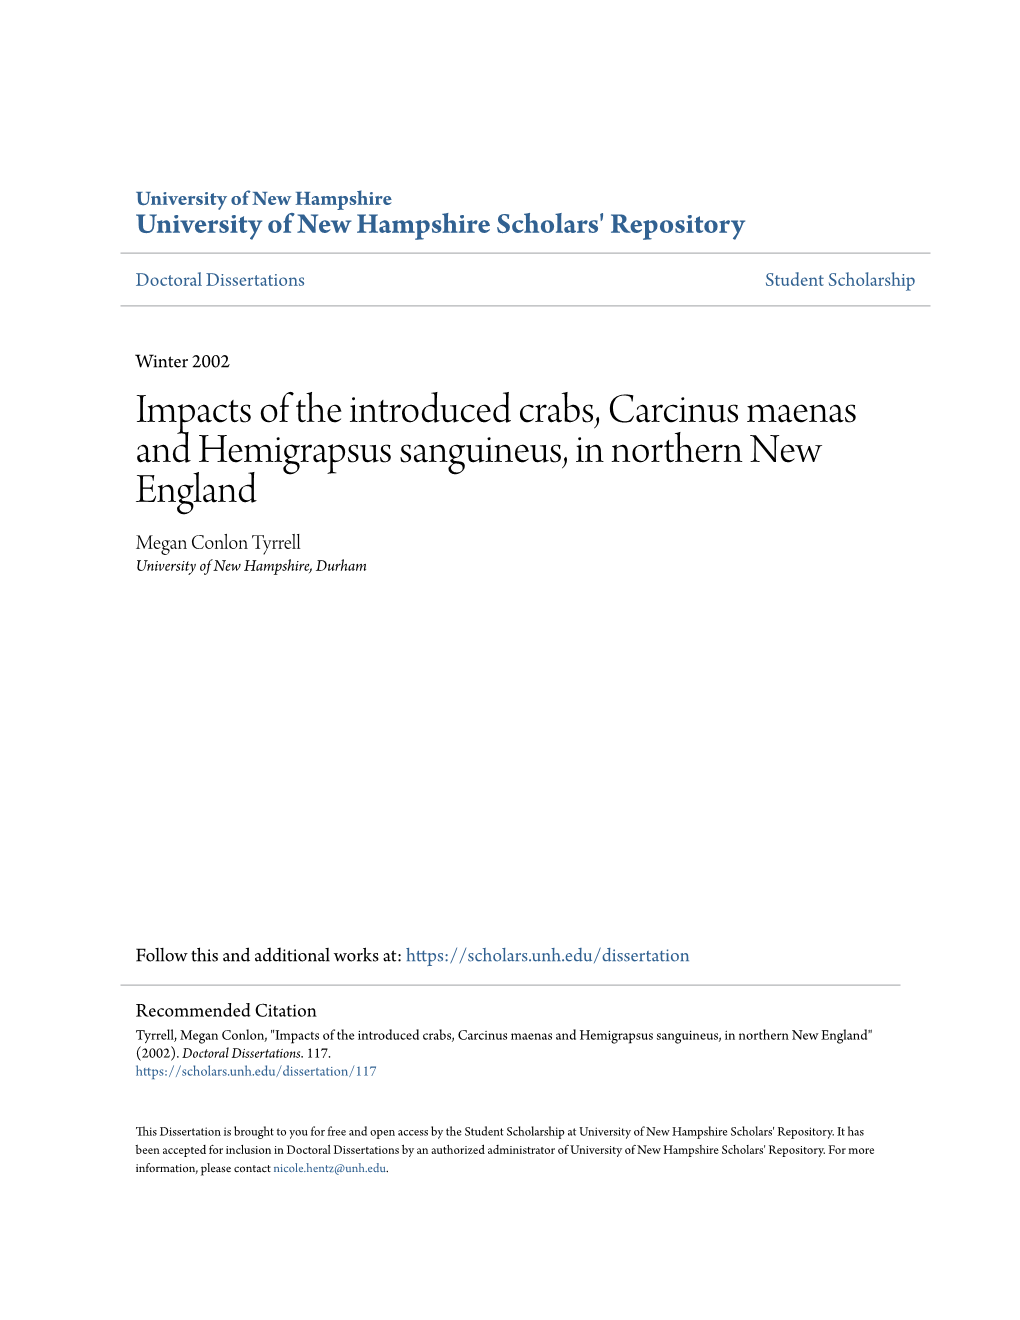 Impacts of the Introduced Crabs, Carcinus Maenas and Hemigrapsus Sanguineus, in Northern New England Megan Conlon Tyrrell University of New Hampshire, Durham